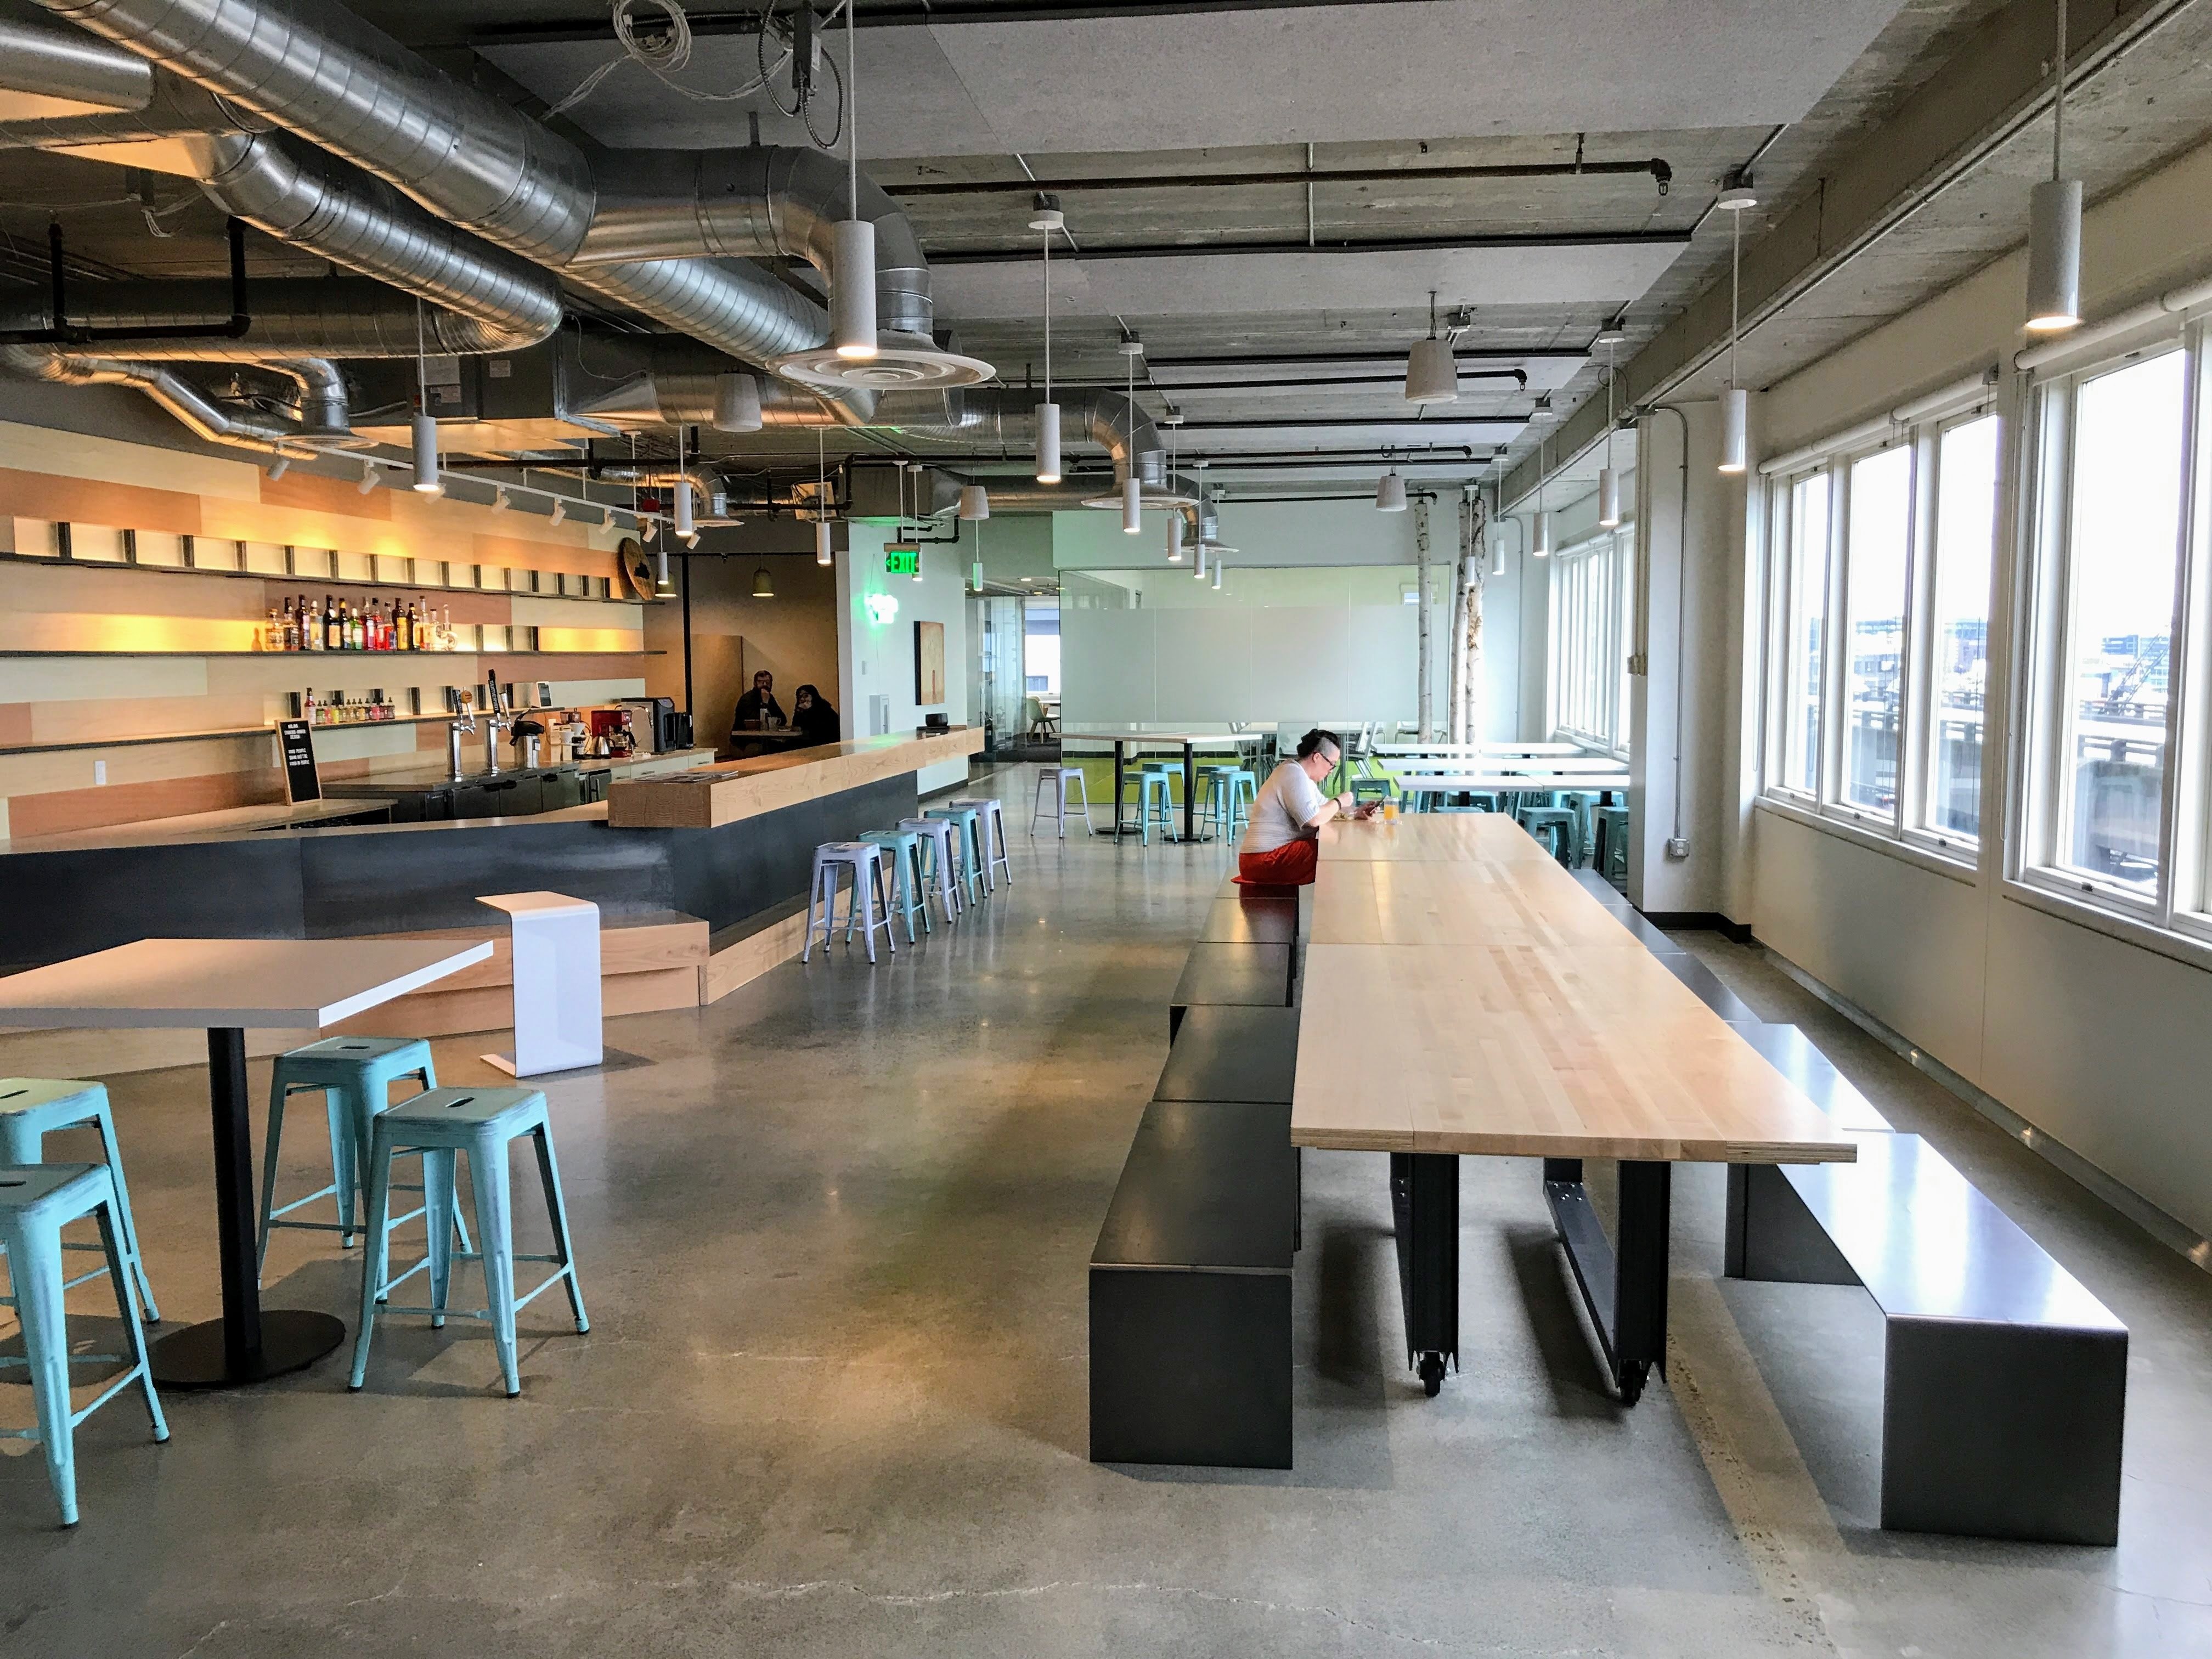 Dining area in Blink's Seattle office.